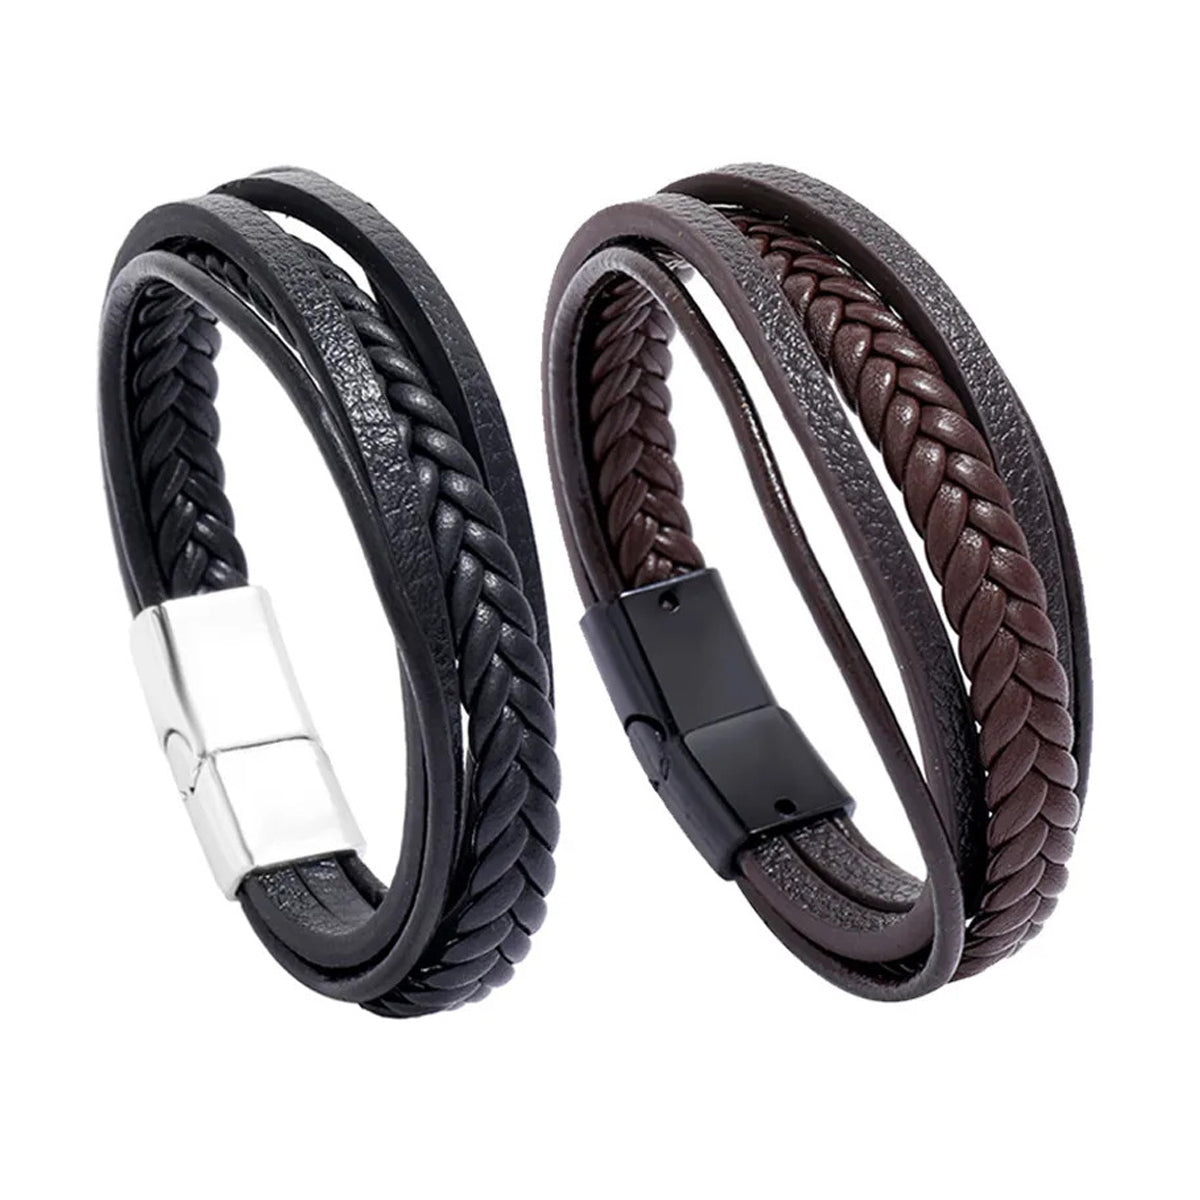 High quality fred bracelet men /women magnetic buckle stainless